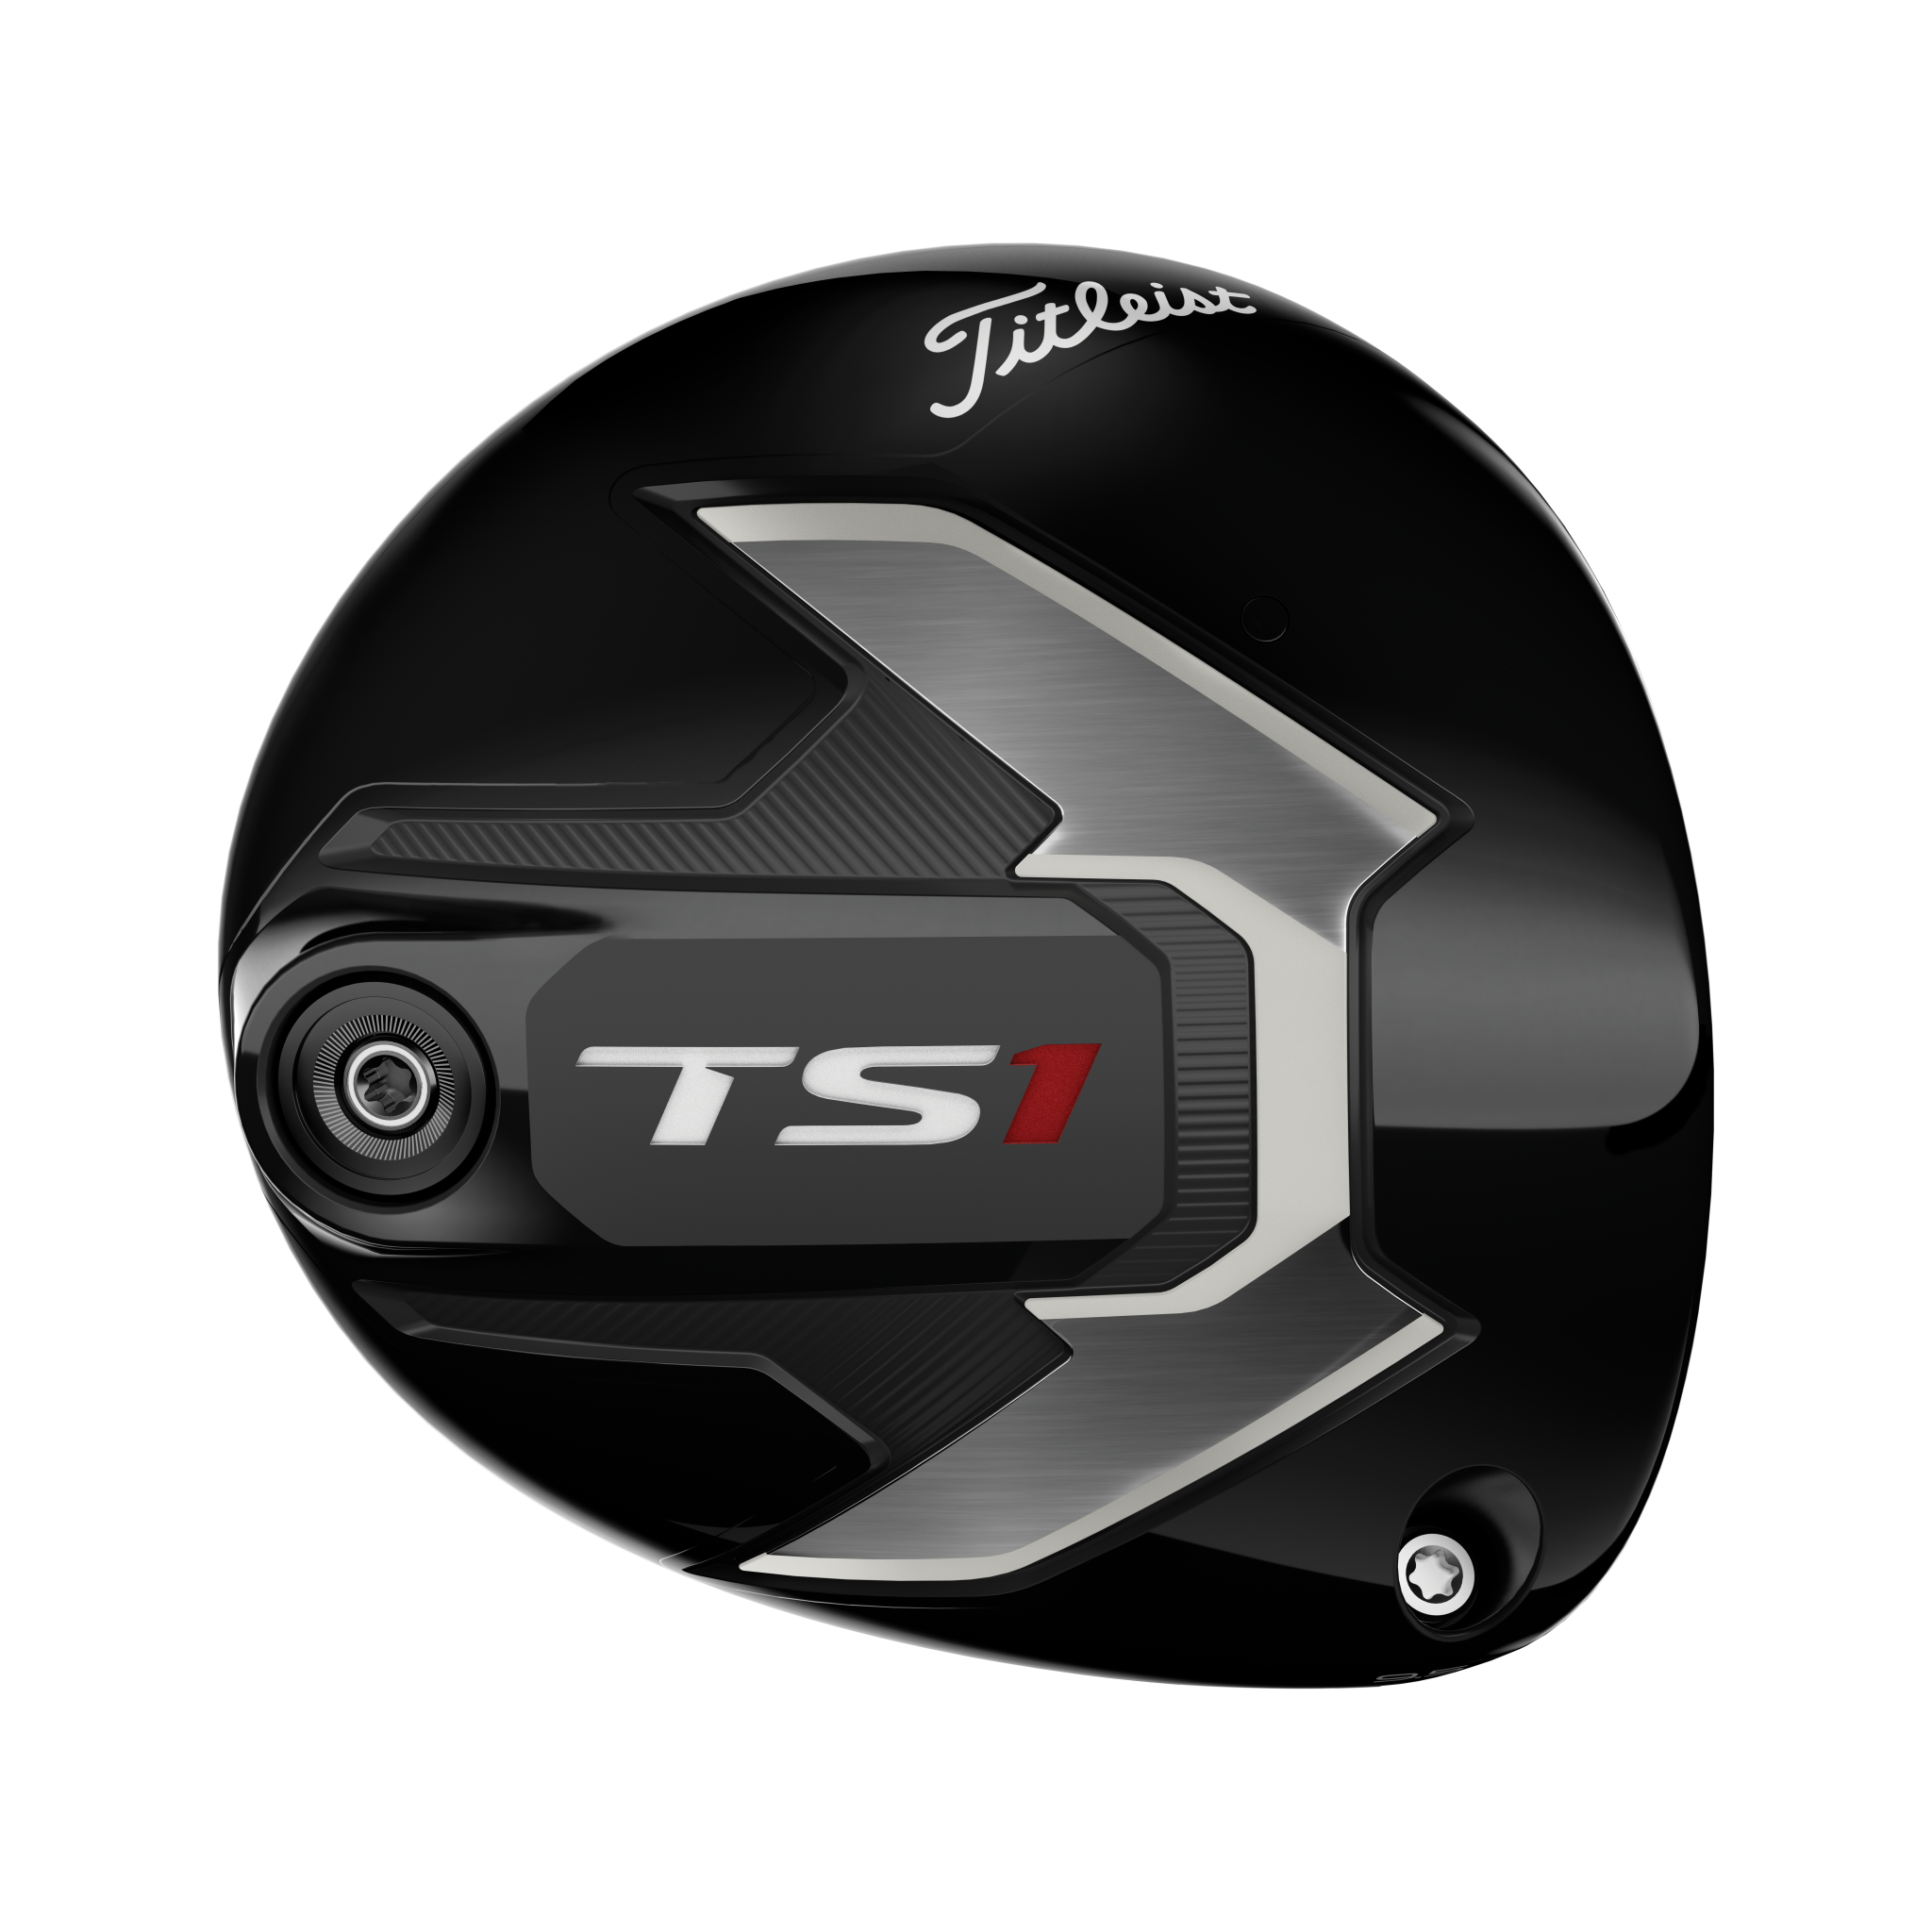 Titleist launches TS1 driver, ideal for moderate golf swing speeds